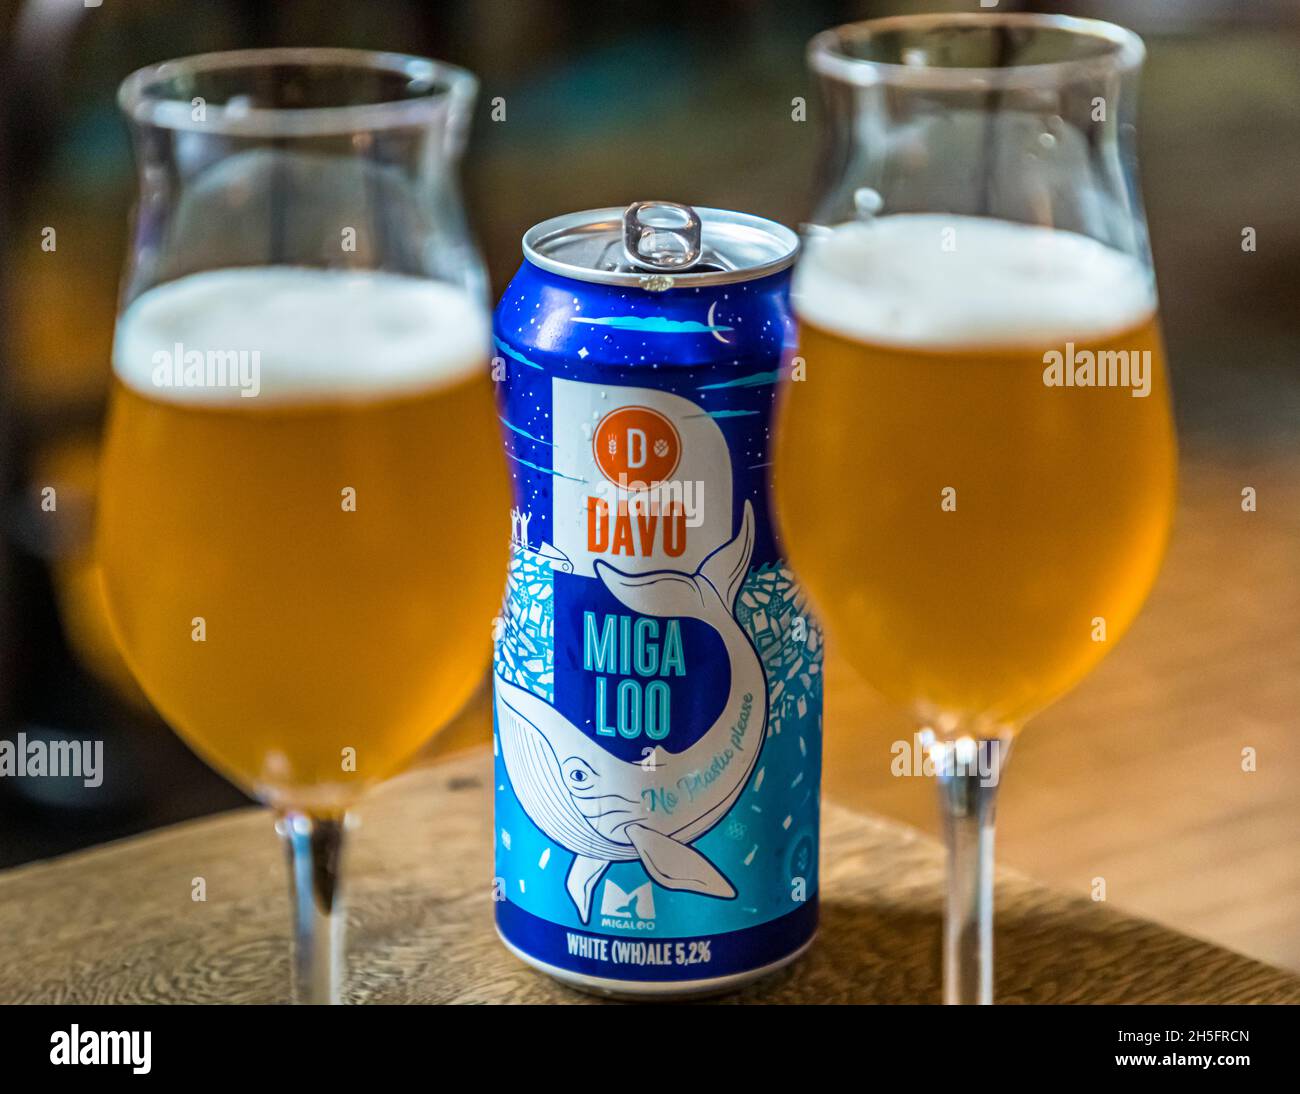 Canned beer Miga Loo from Davo, Netherlands Stock Photo